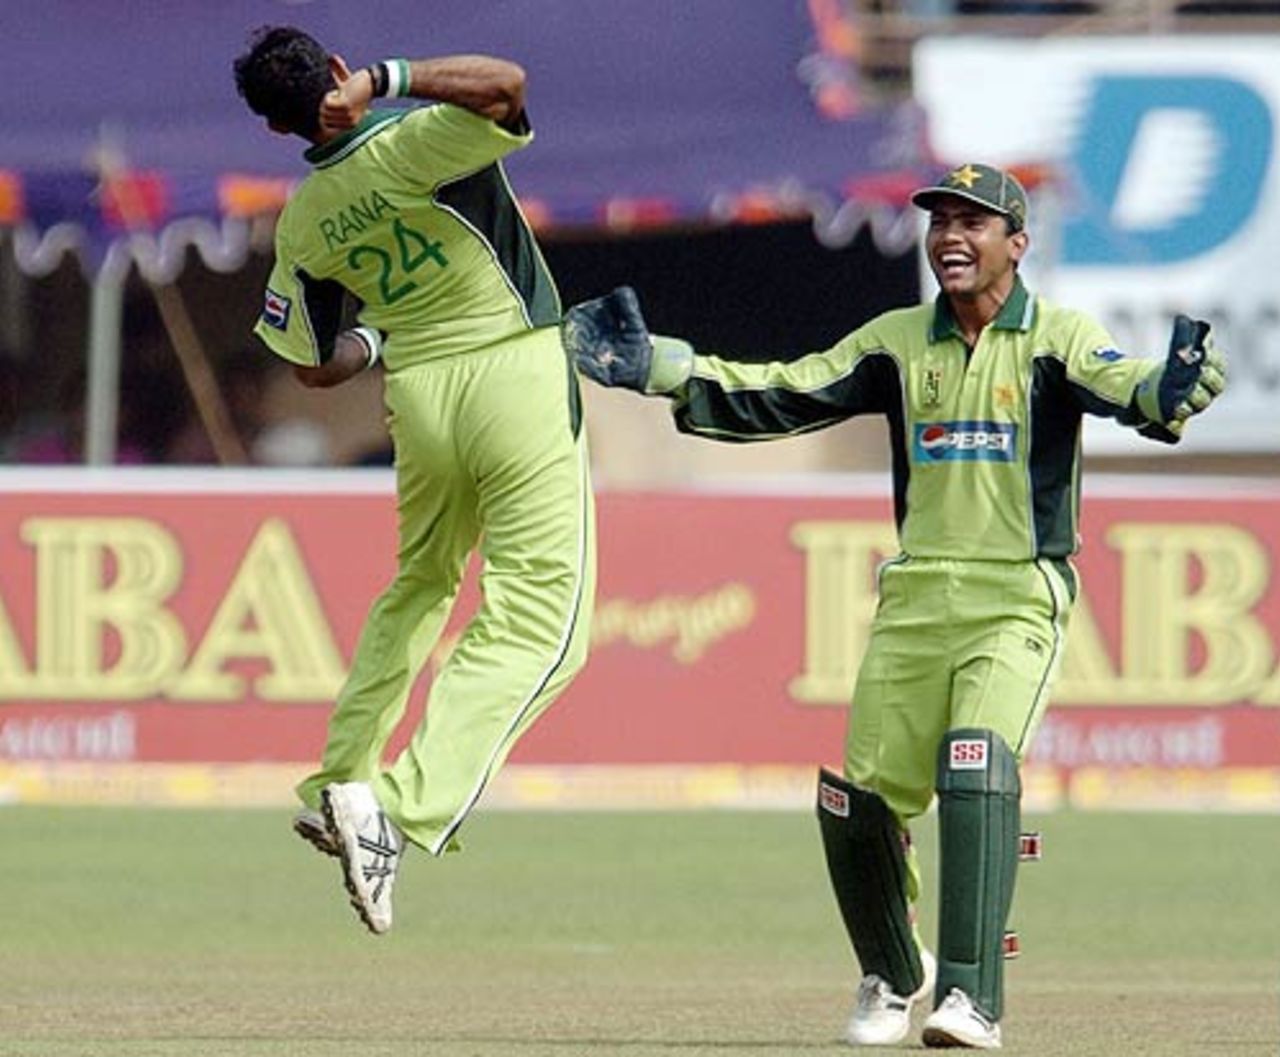 Naved-ul-Hasan Rana celebrates the wicket of the out-of-form Sourav Ganguly who was bowled over for a duck, India v Pakistan, 1st ODI, Kochi, April 2, 2005